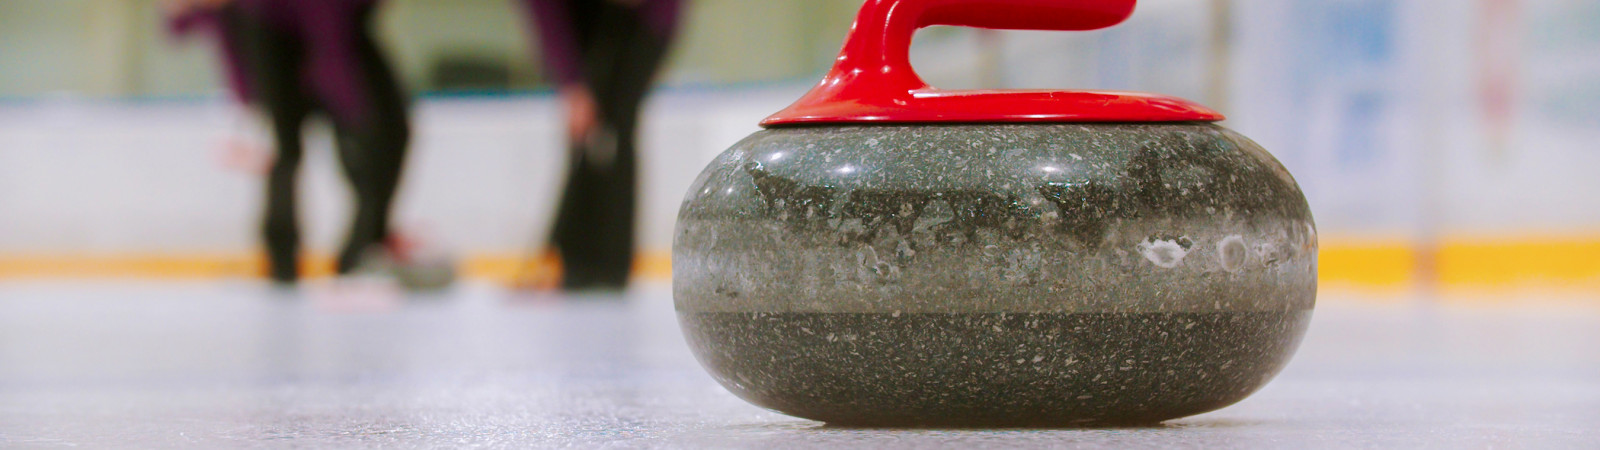 Curling - a granite stone with red handle on the ice field